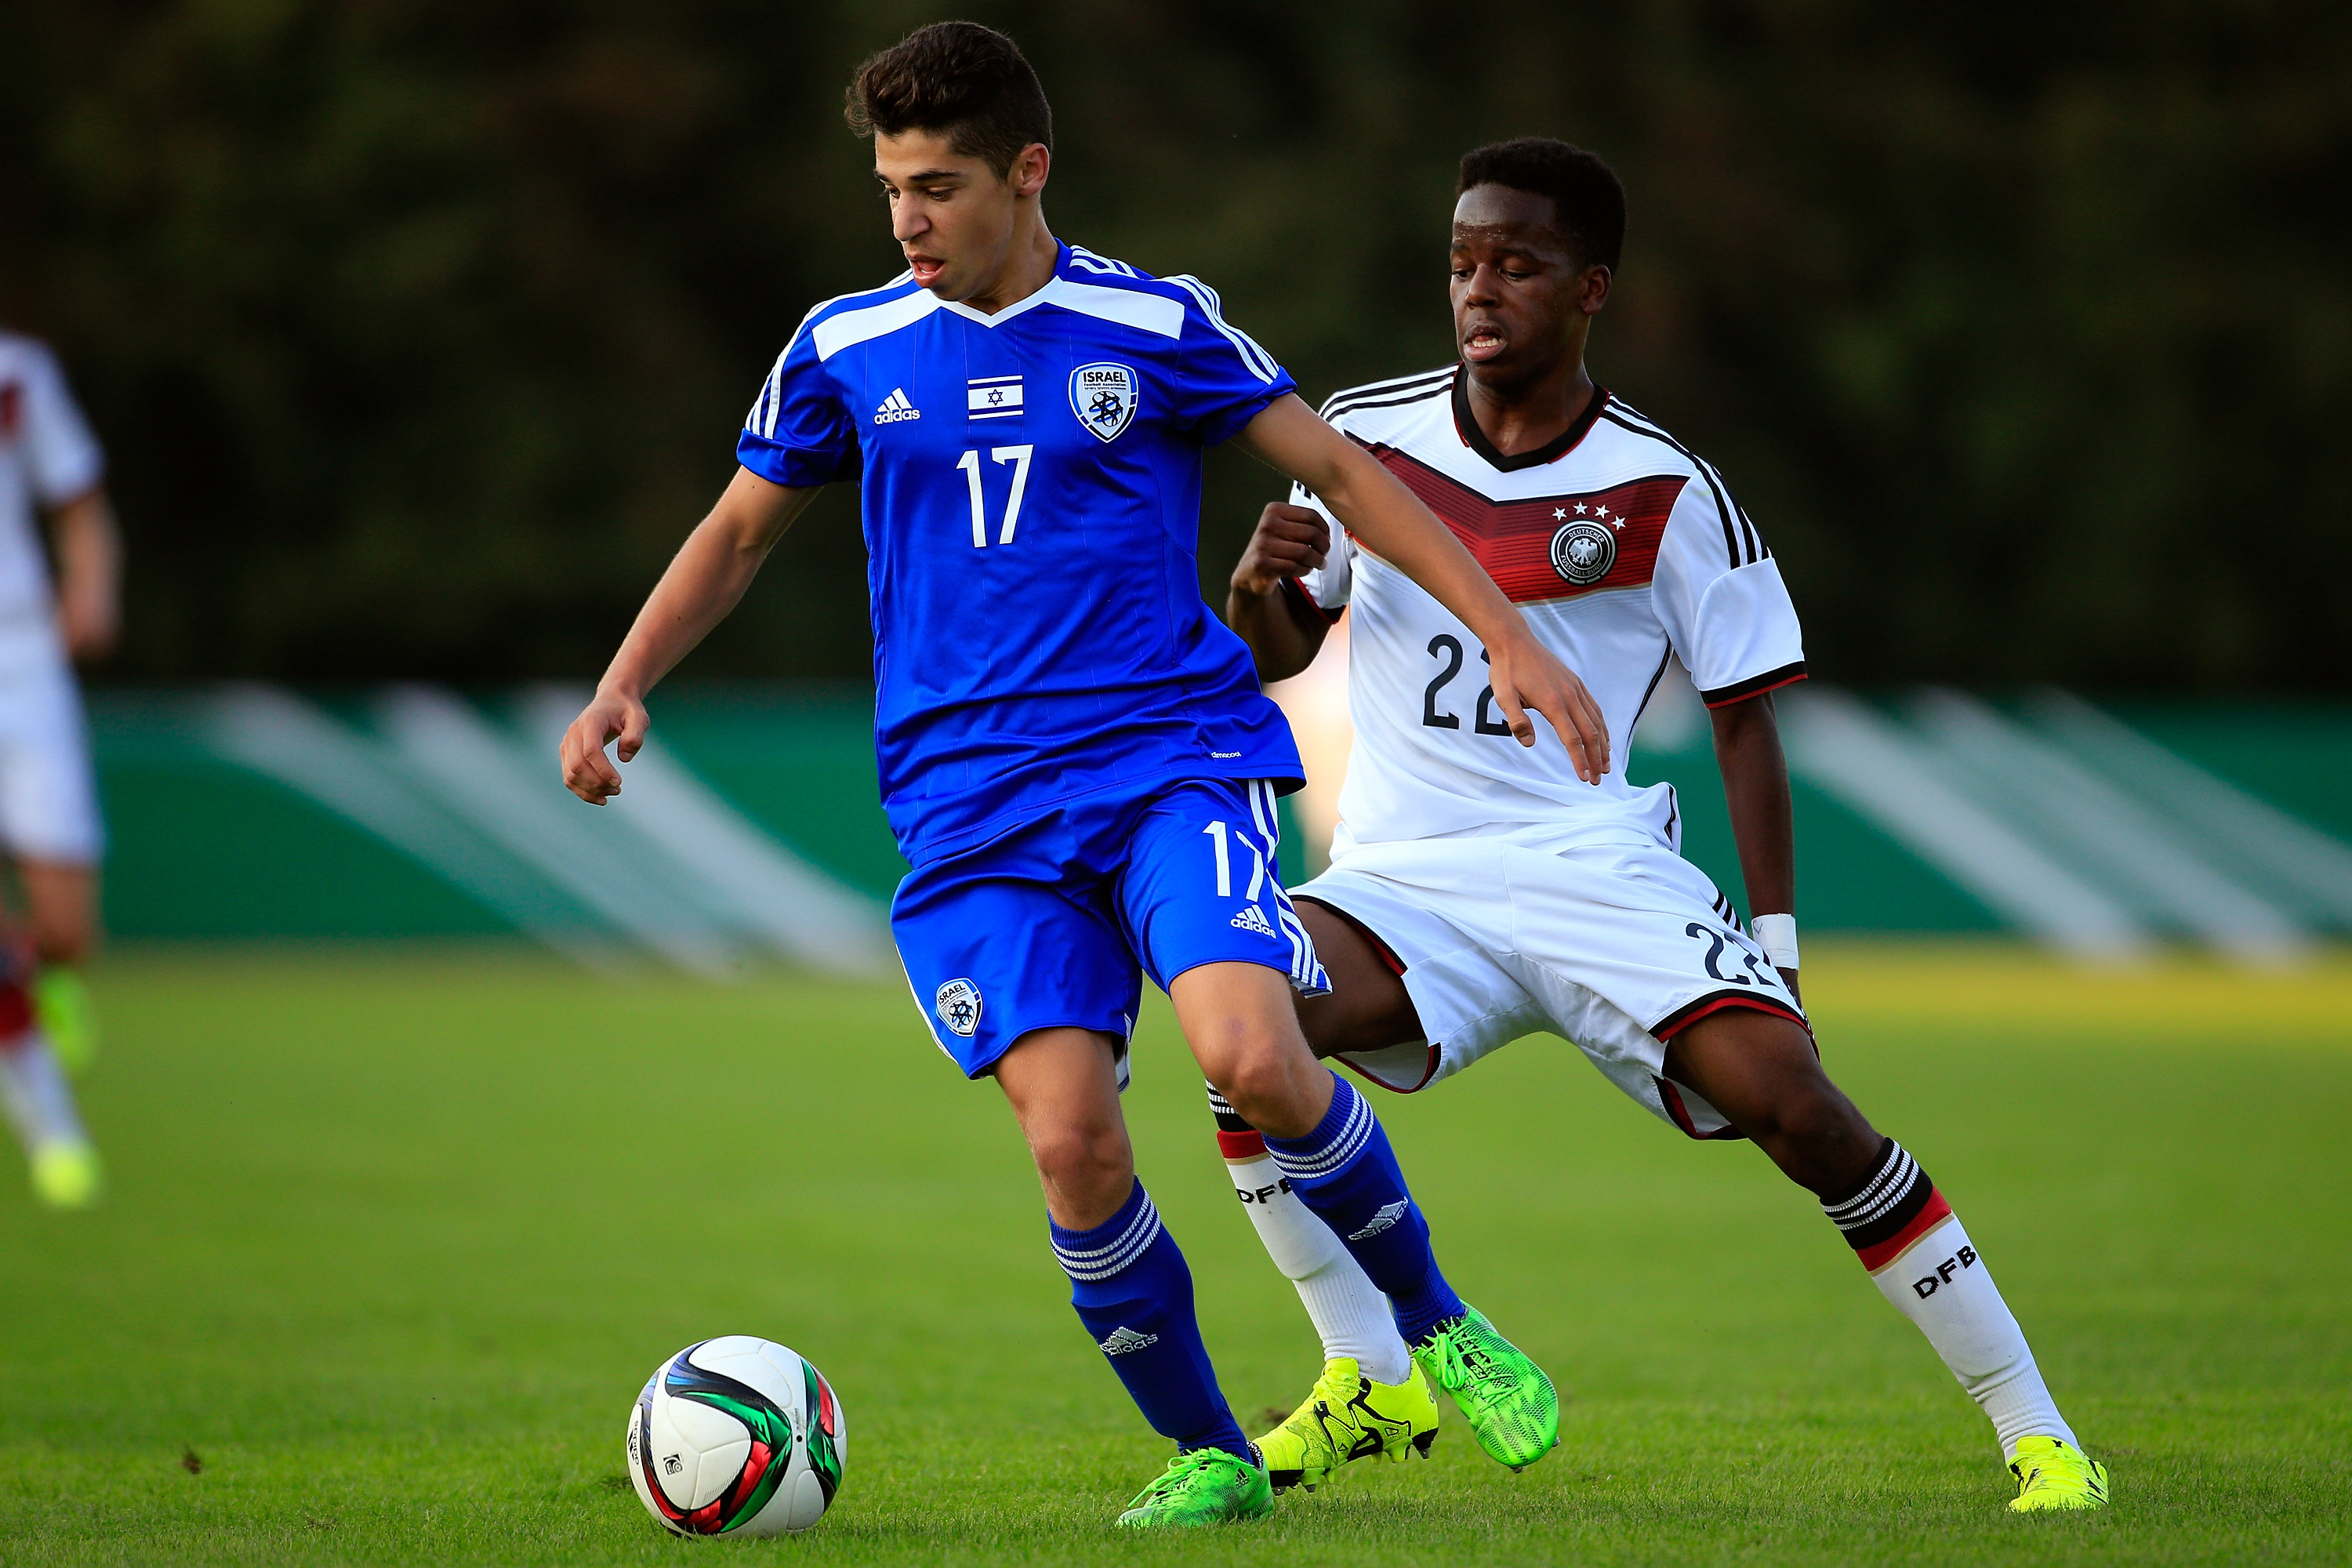 BREMEN, GERMANY - SEPTEMBER 11:  Alfons Amade of U17 Germany  challenges Manor Solomon  of U17 Israel during the match between U17 Germany v U17 Israel at BZA Obervieland on September 11, 2015 in Bremen, Germany.  (Photo by Martin Stoever/Bongarts/Getty Images)